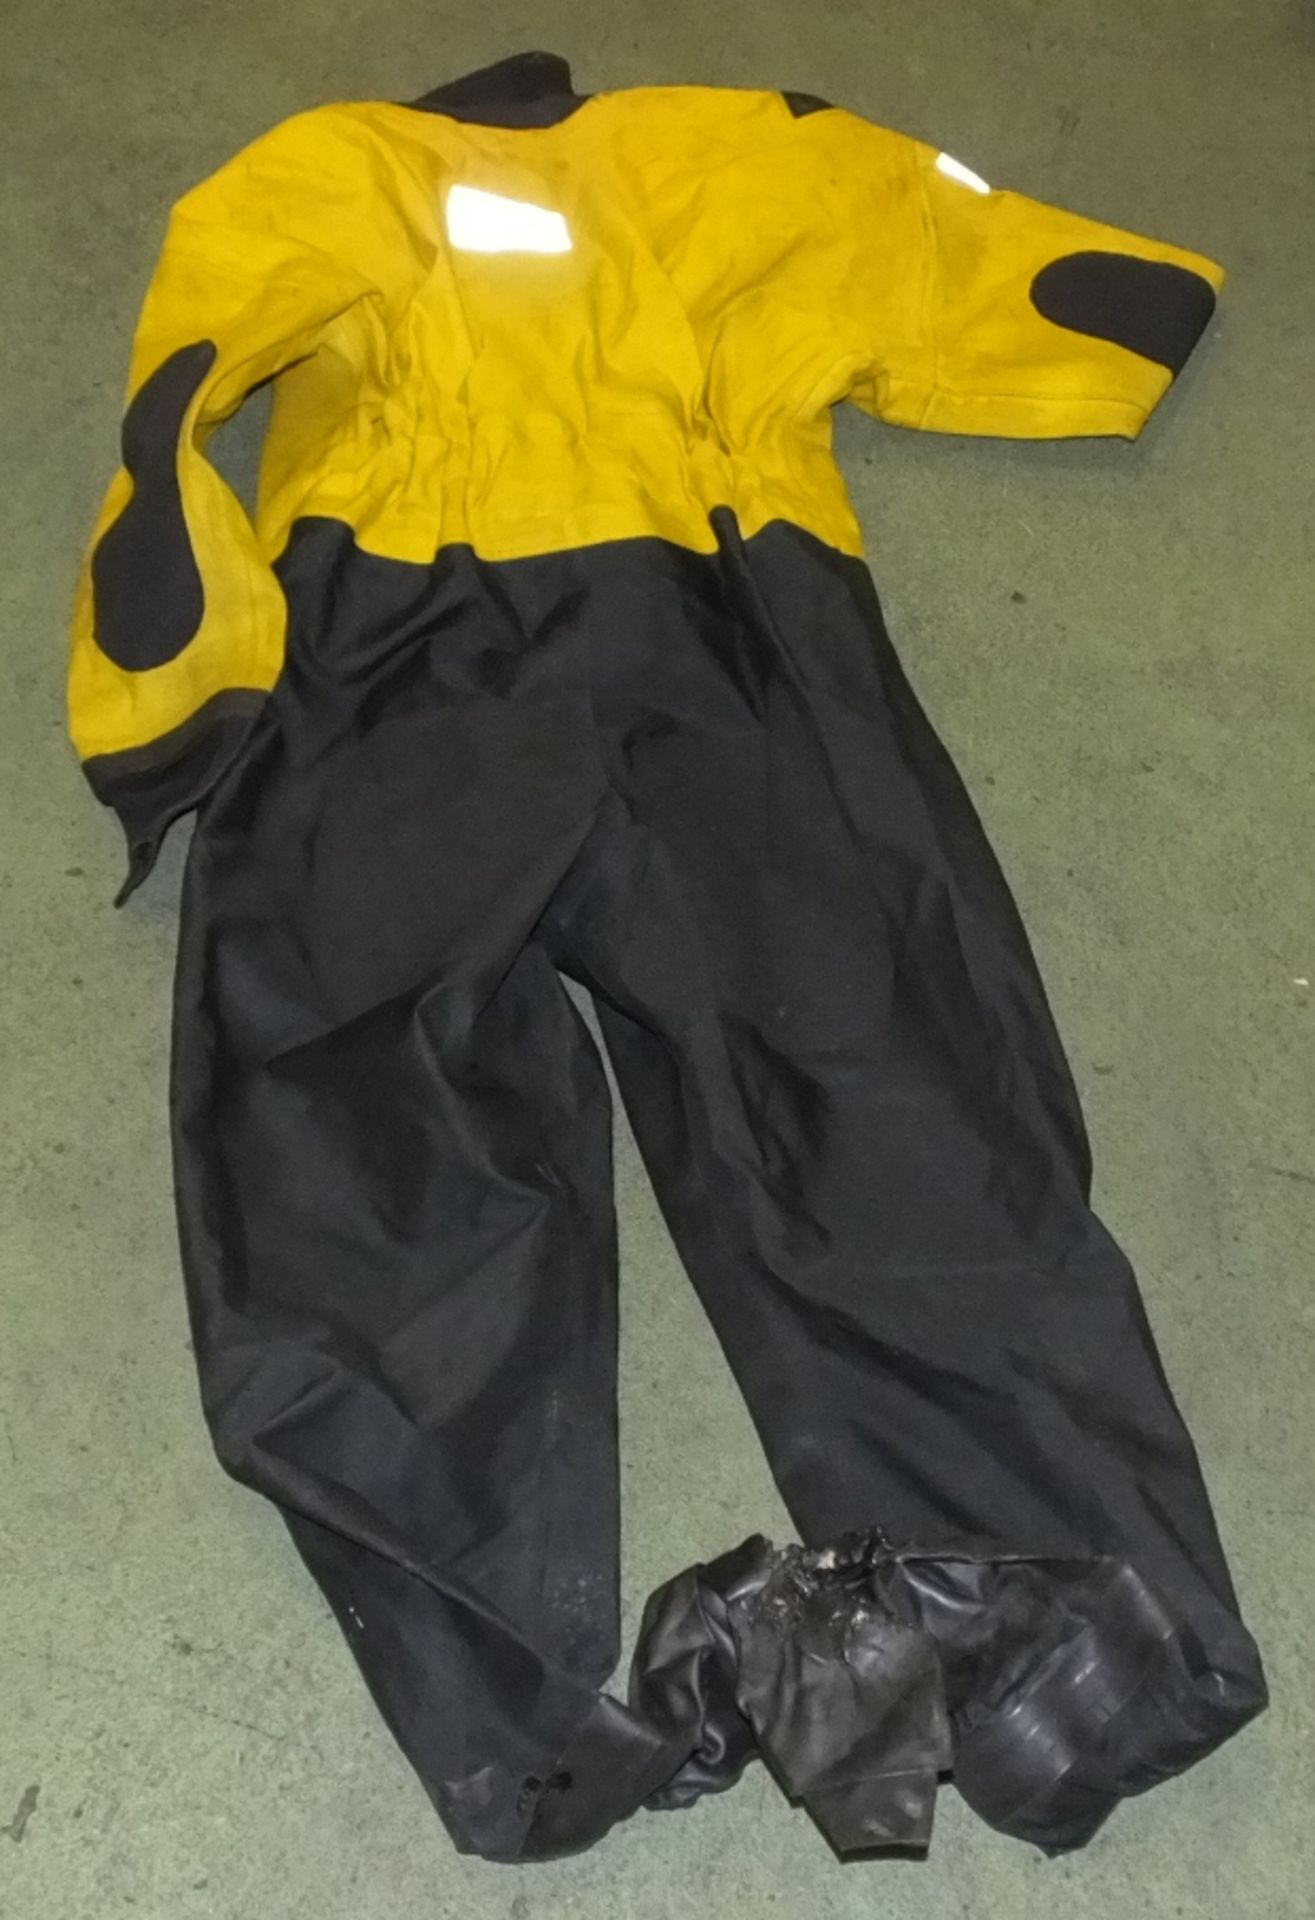 10x Typhoon Dry Suits, 1x Wetsuit - Image 4 of 4